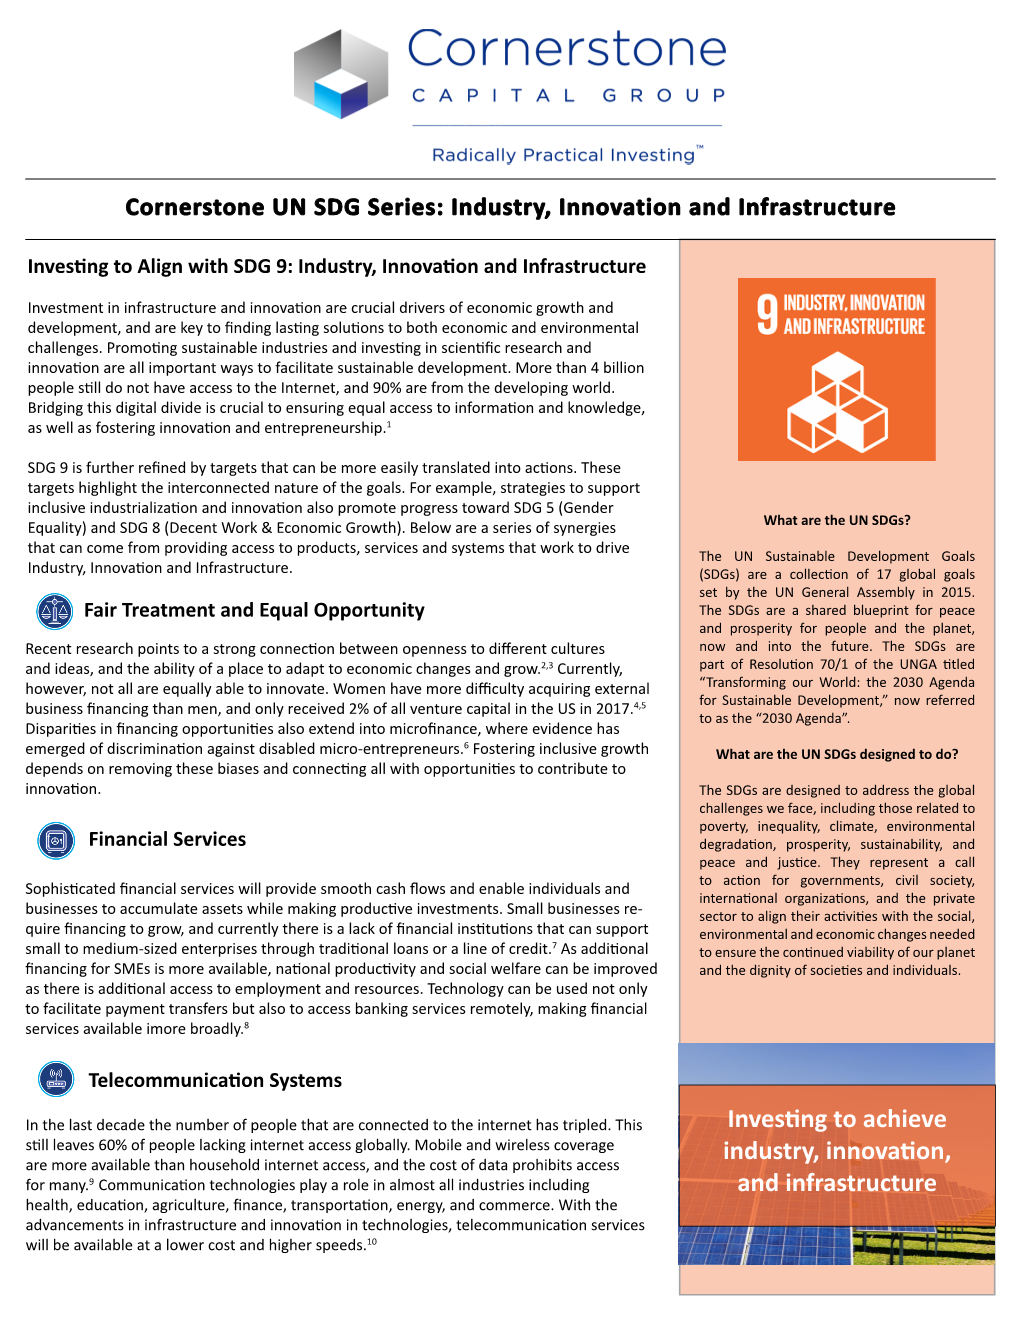 Investing to Achieve Industry, Innovation, and Infrastructure